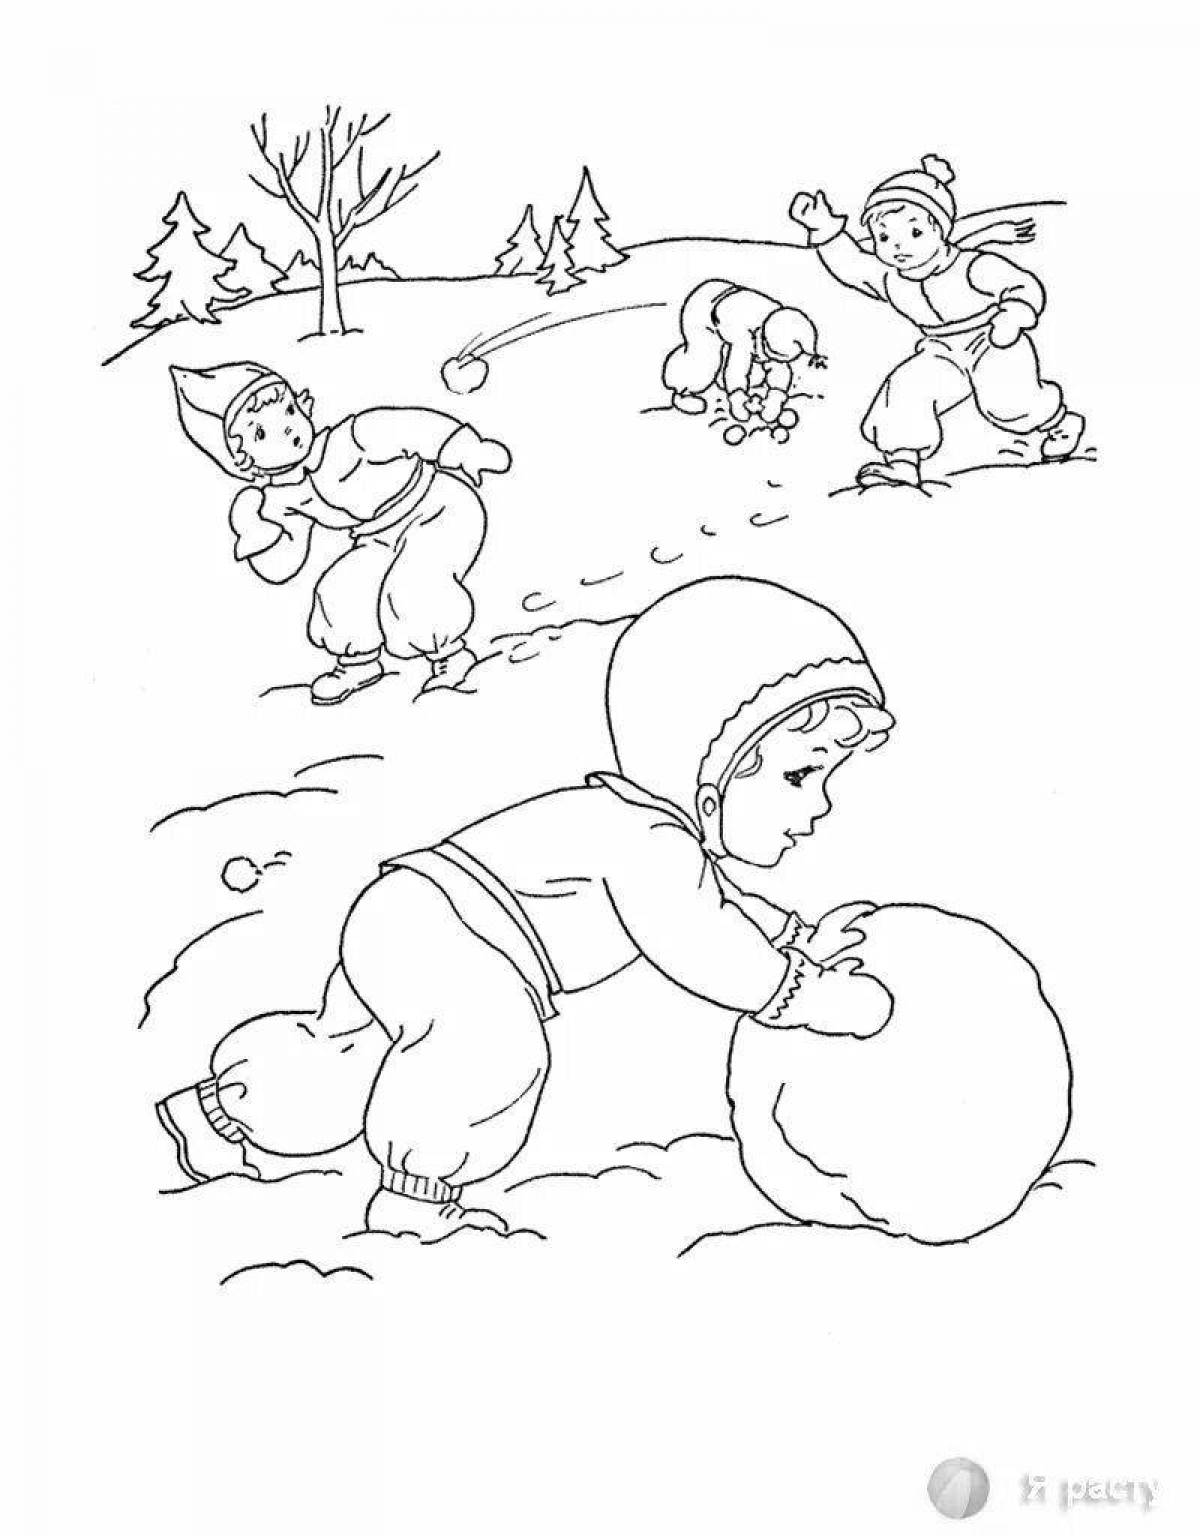 Playful snowball fight coloring page